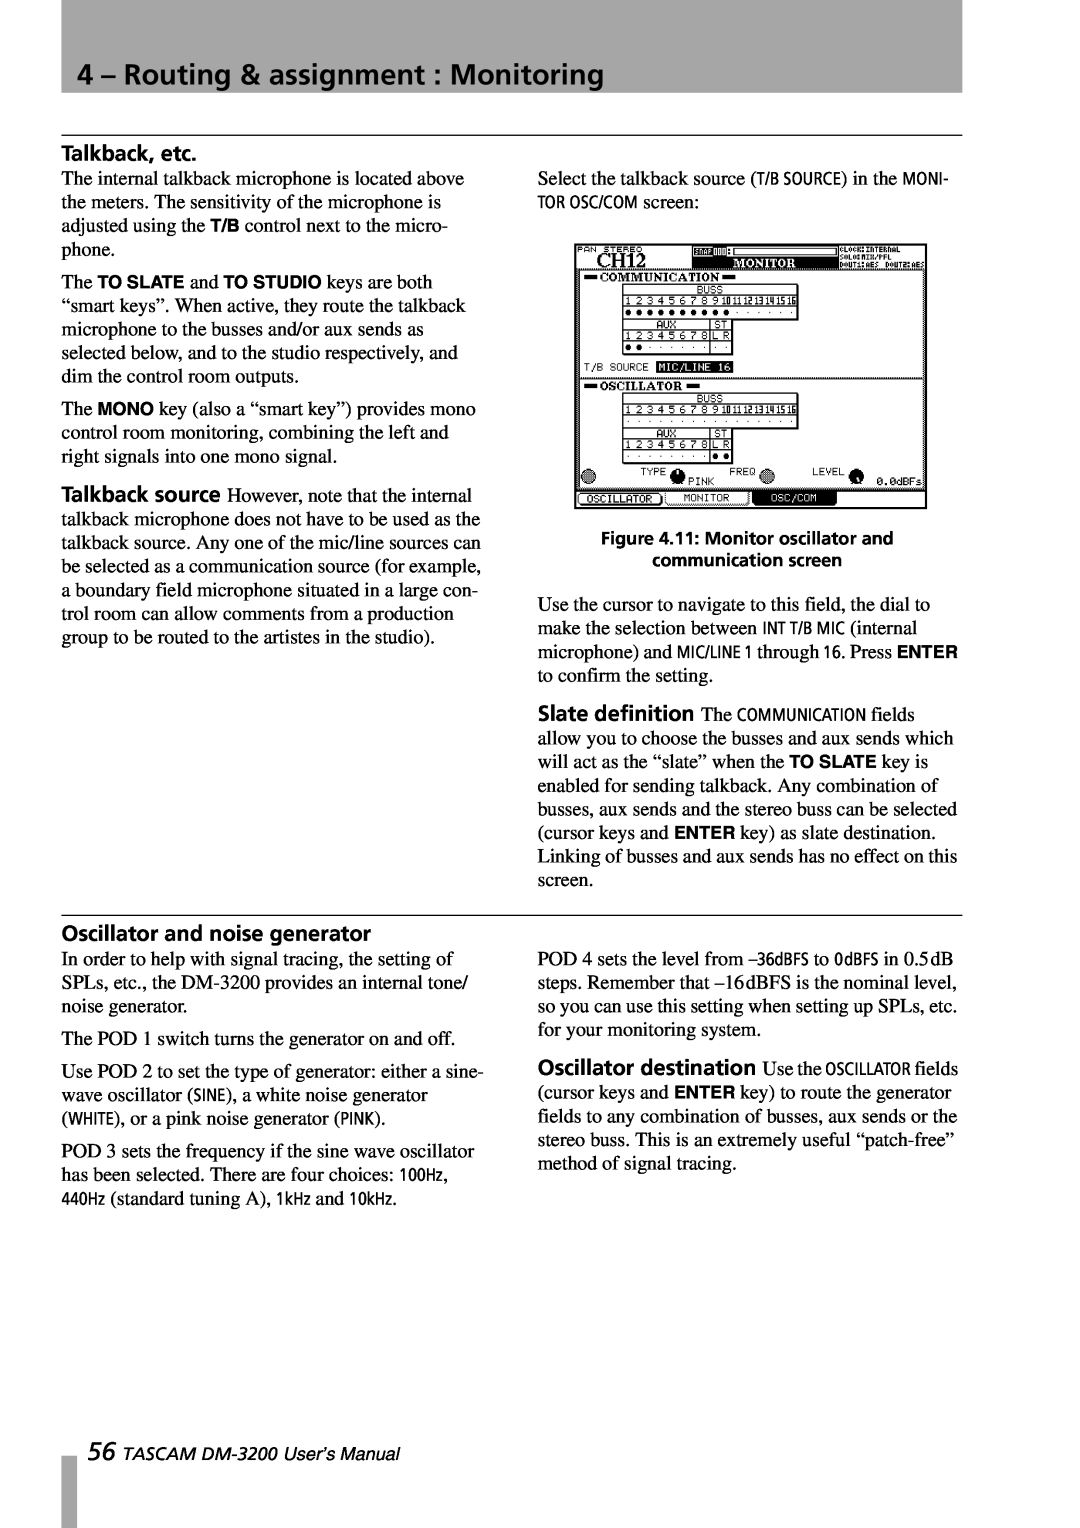 Tascam DM-3200 owner manual Talkback, etc, Oscillator and noise generator, 4 – Routing & assignment : Monitoring 